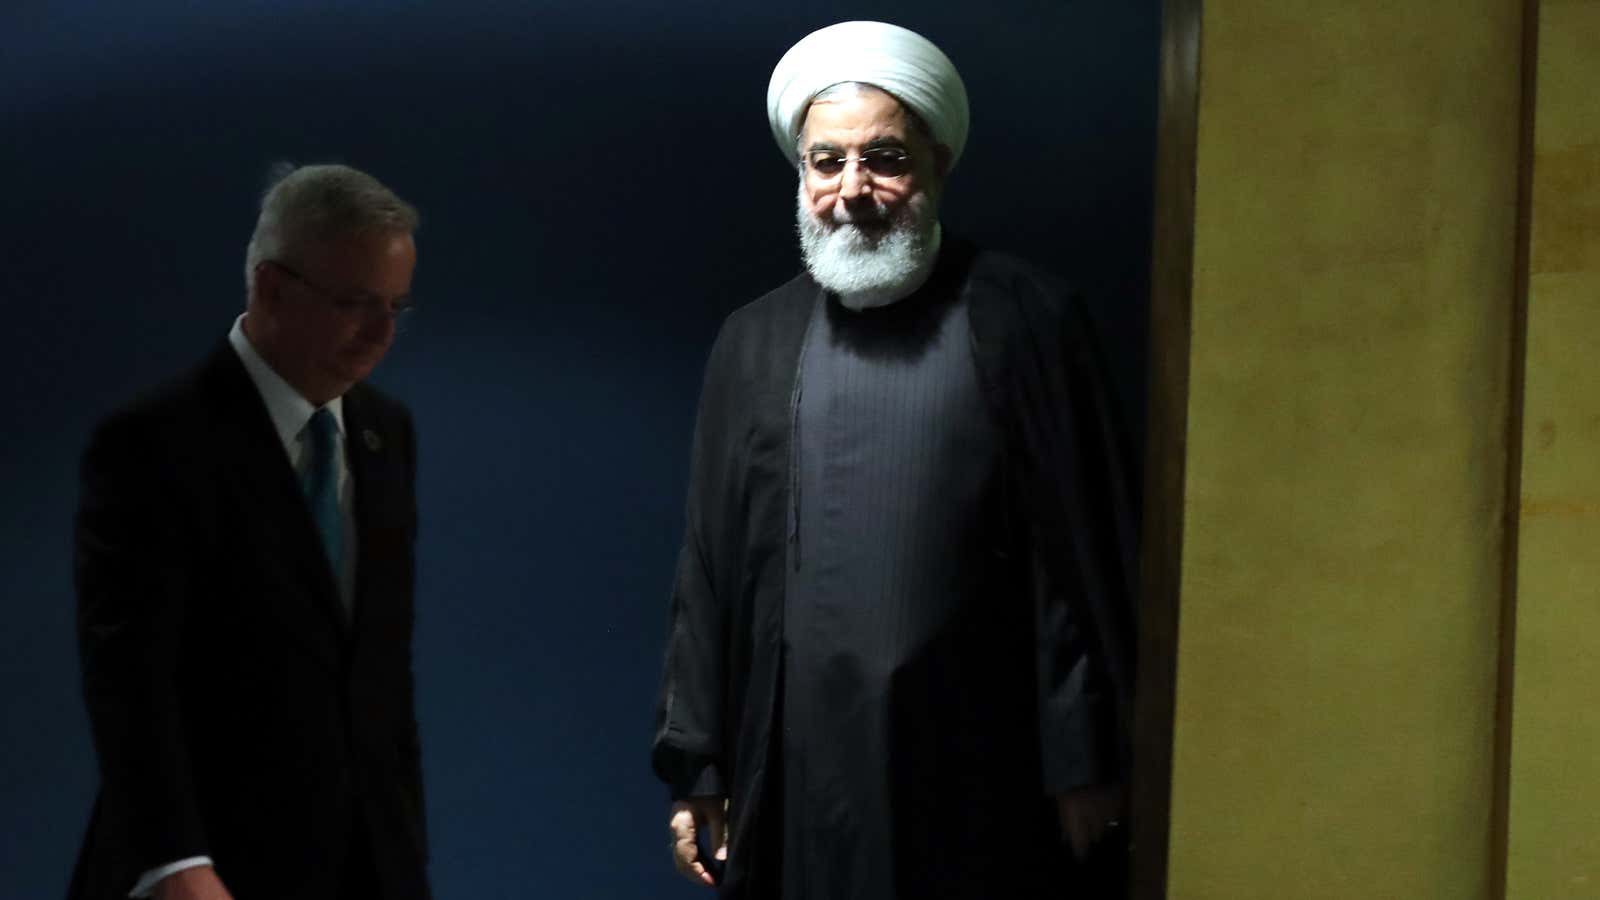 Iranian President Hassan Rouhani arrives to address the United Nations General Assembly.